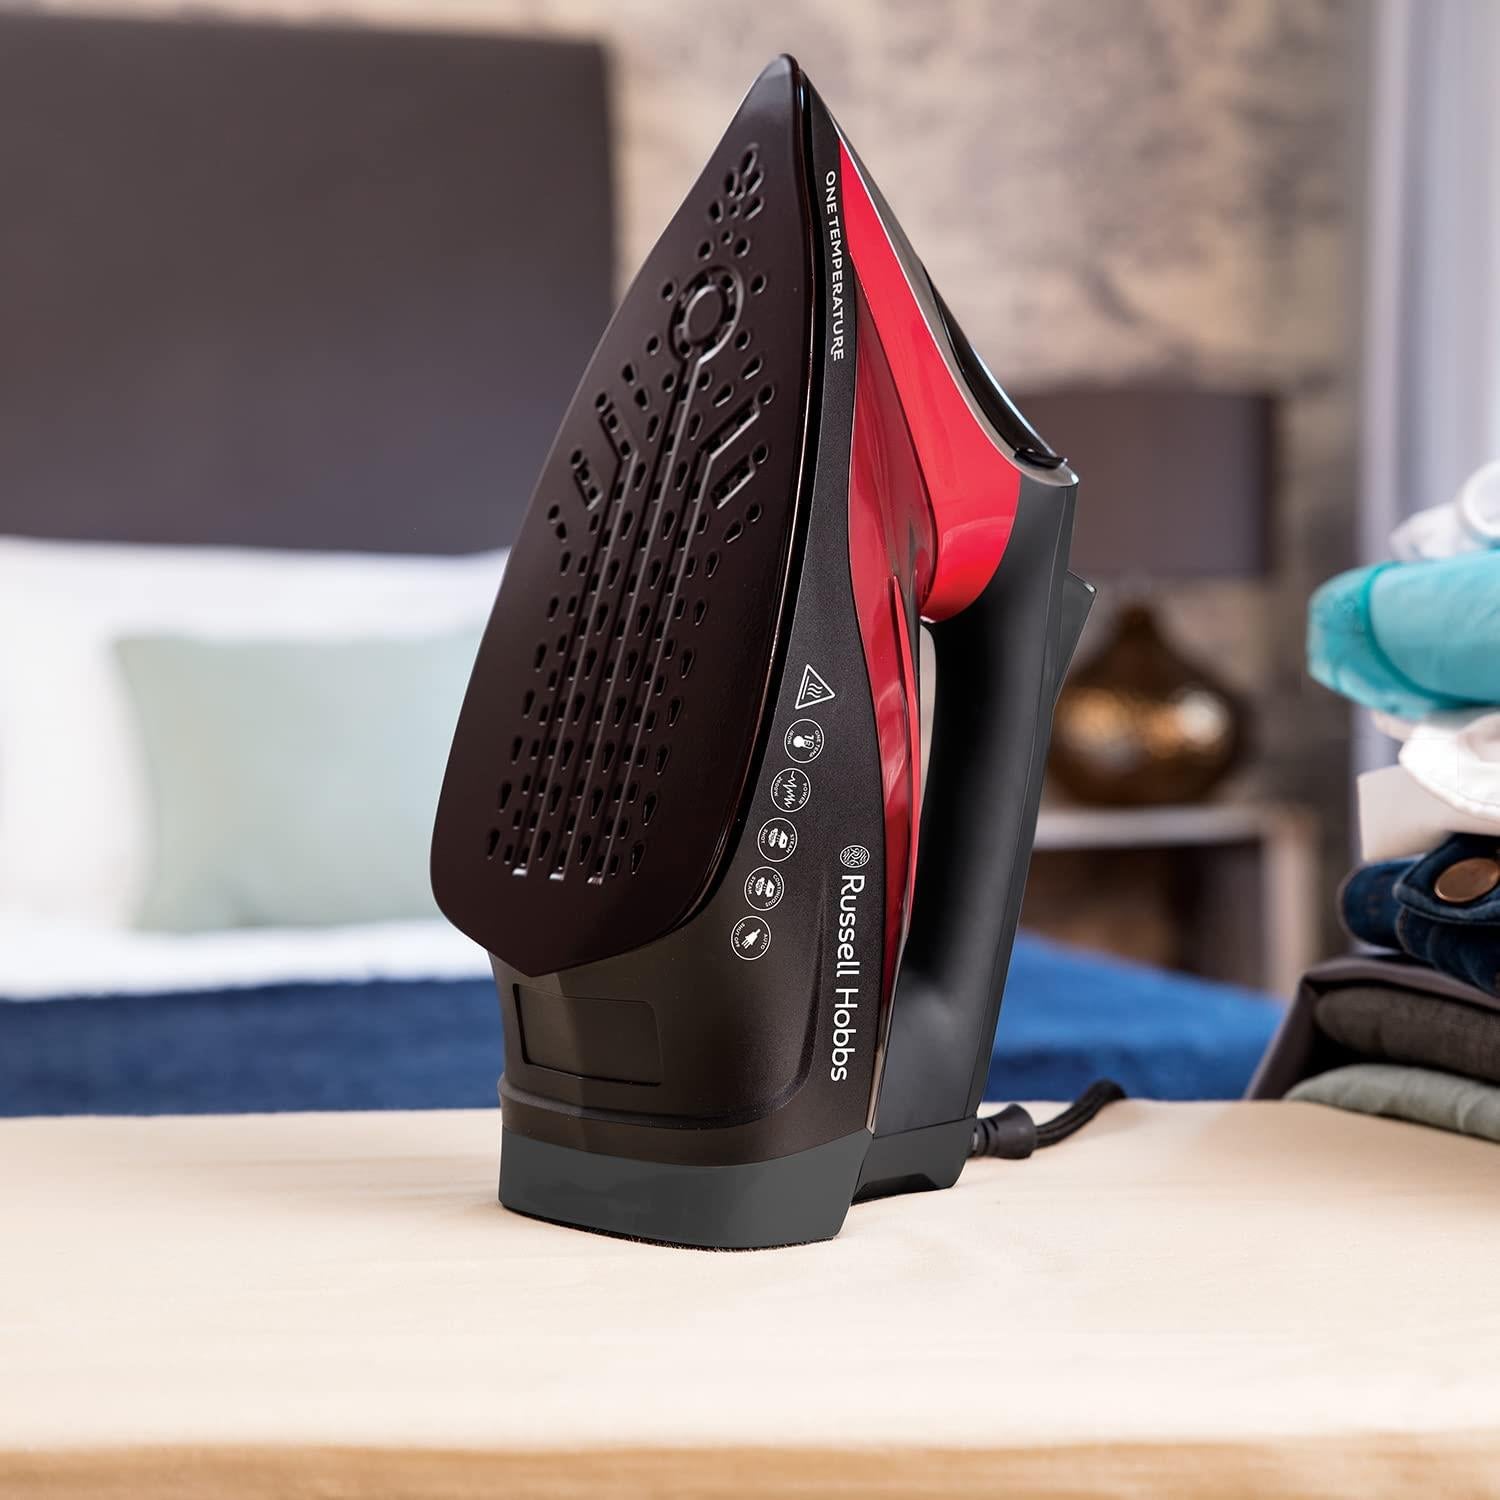 Russell Hobbs Steam Iron One Temperature Ironing,2600 W Red/Black - 25090